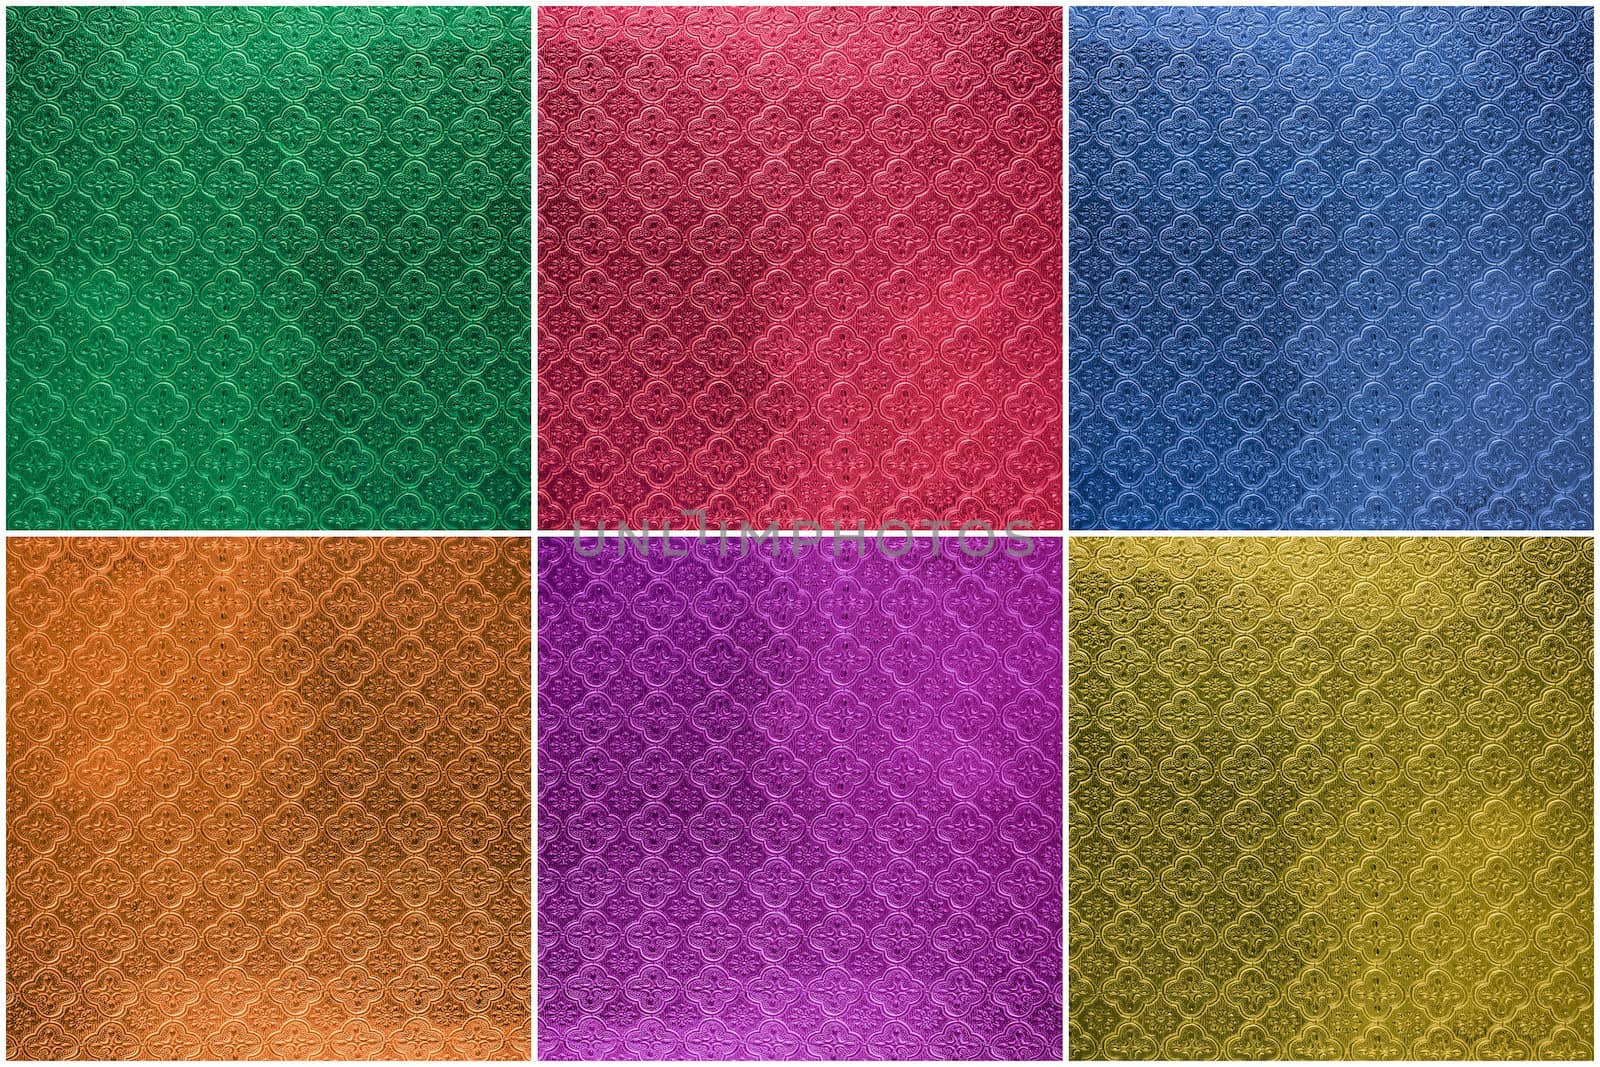 Collage Of Tiled Glass Texture, Background (Green, Blue, Red, Or by ryhor